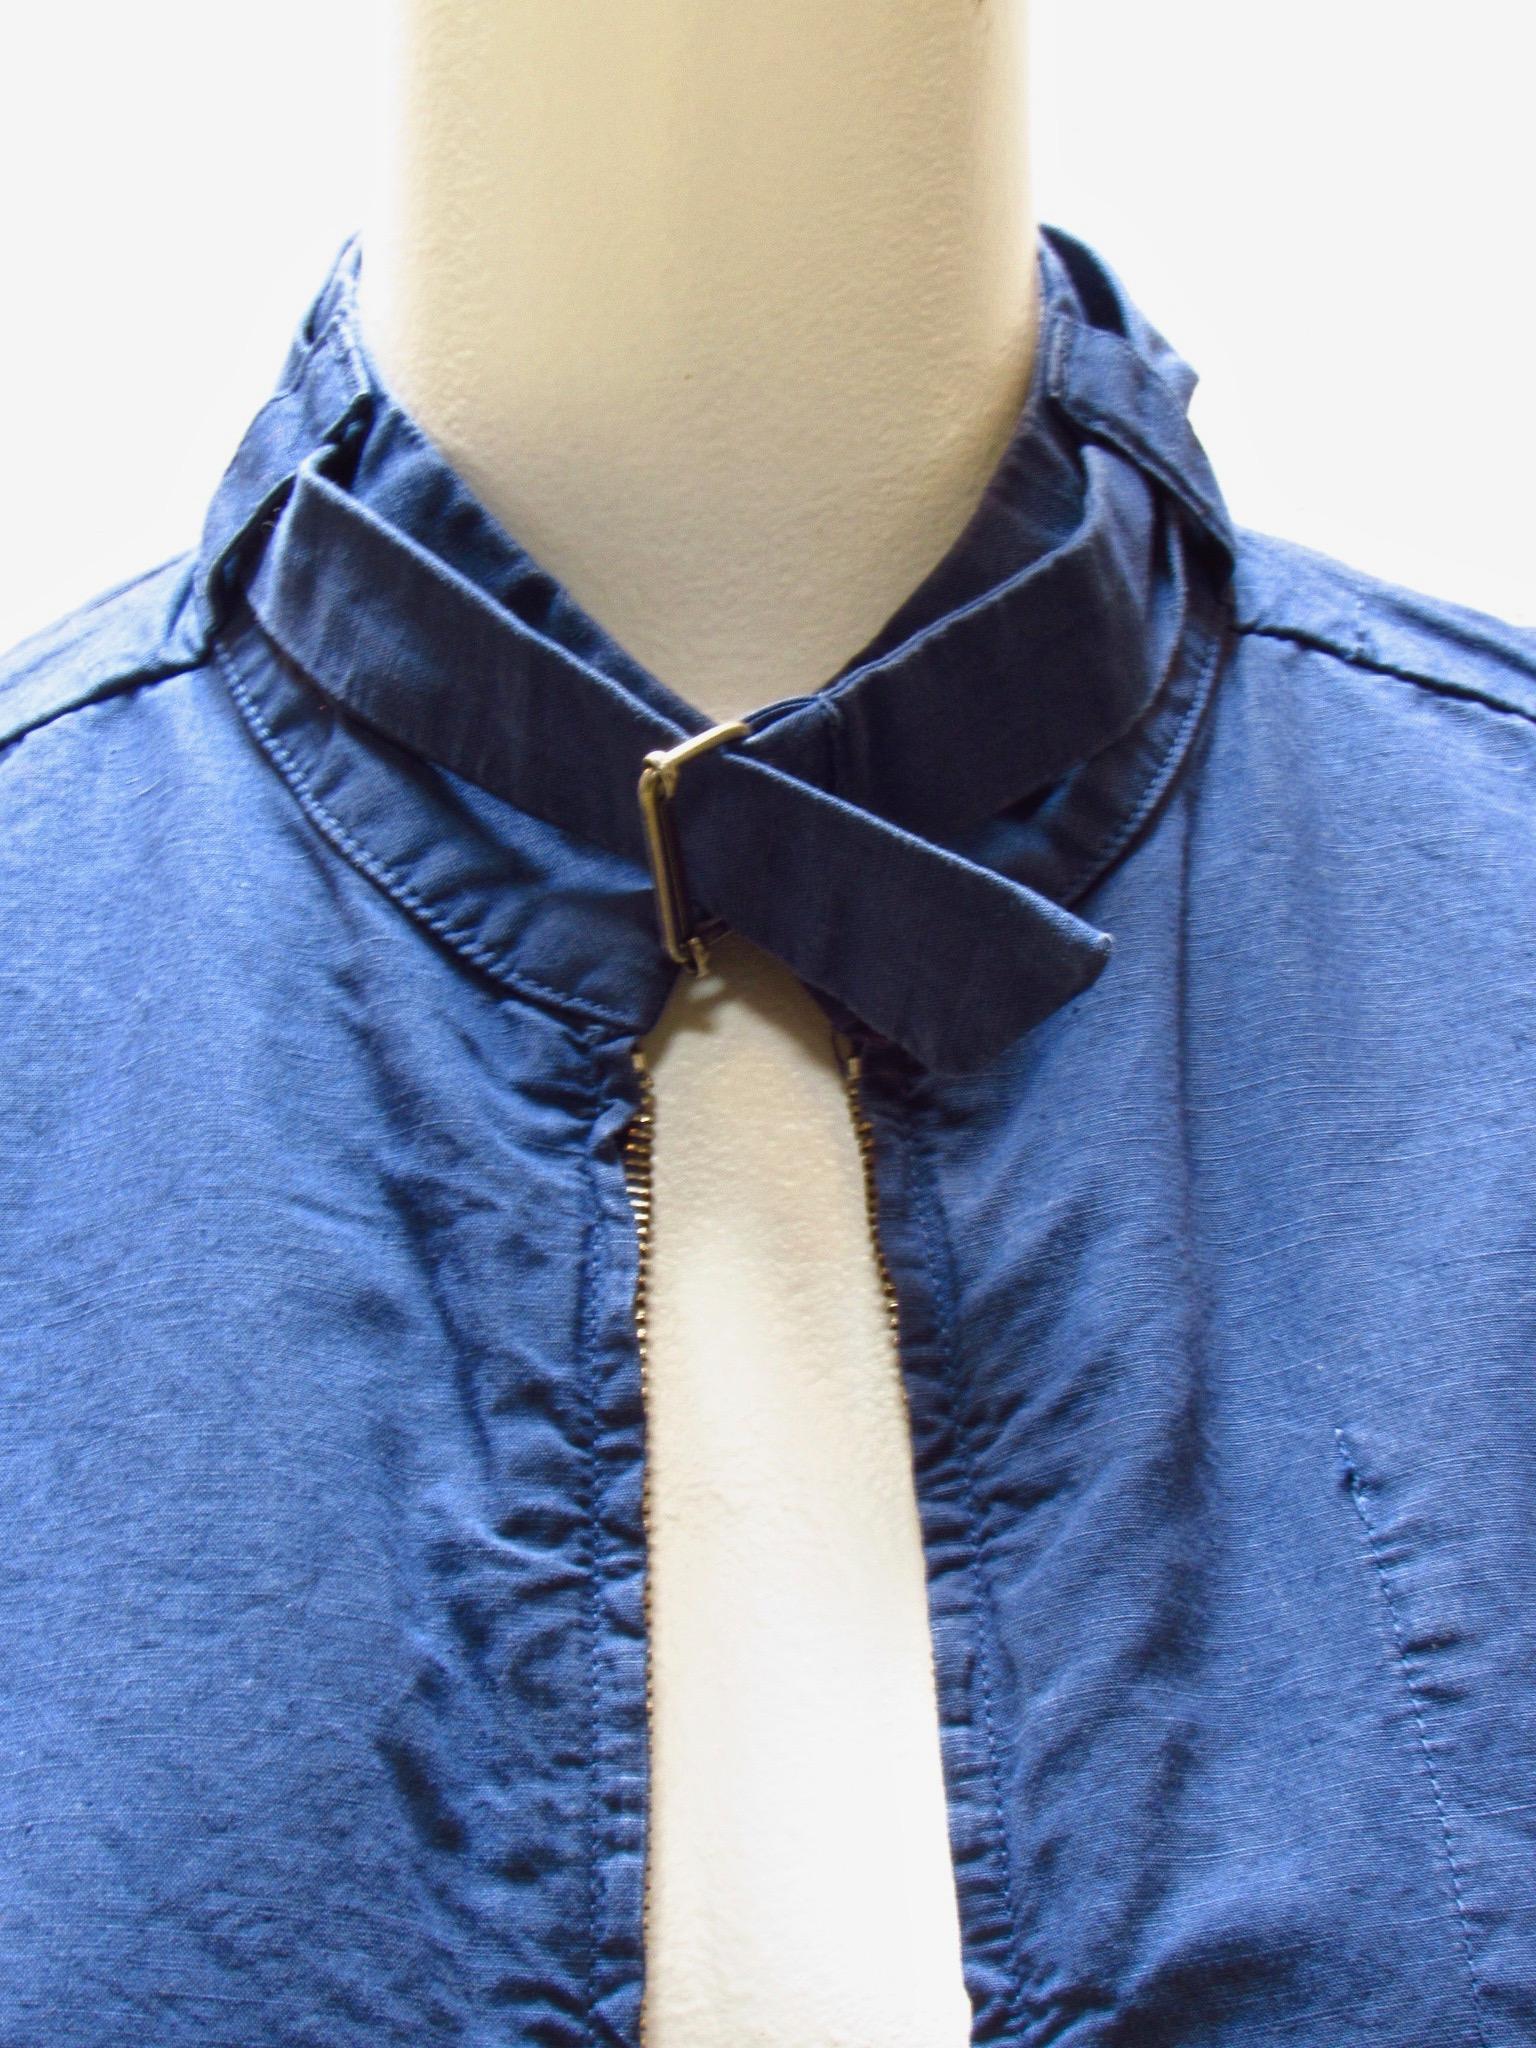 Lightweight navy blue cotton zip-front cropped jacket has two slit front pockets and a belted collar. 